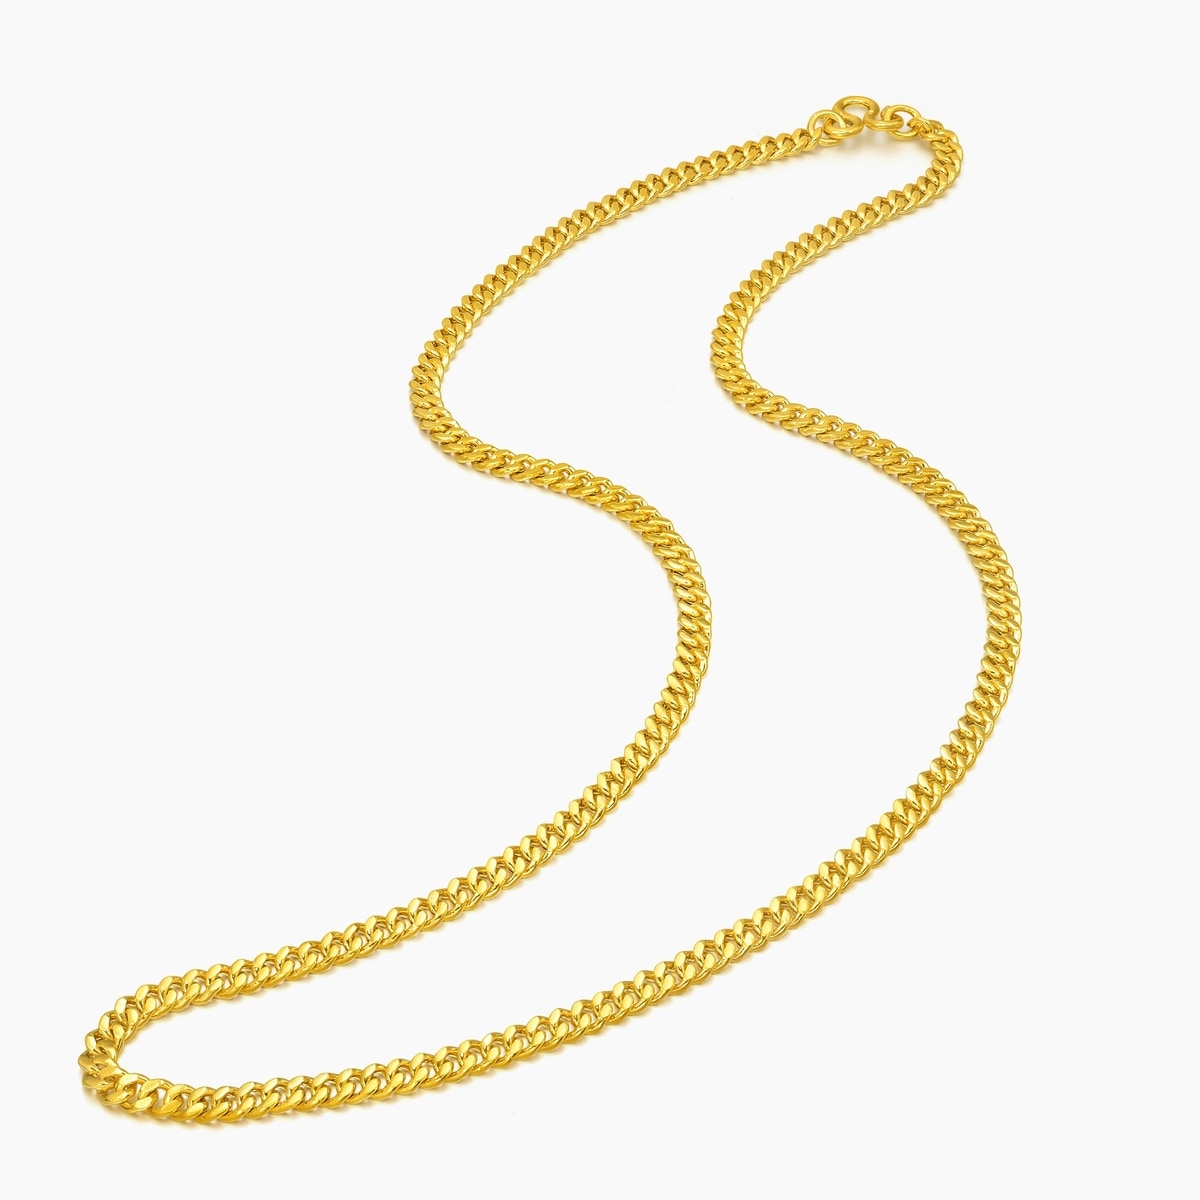 8x11mm 24 K Shiny Gold Plated Chain , Handmade Chain, Bulk Chains, Necklace  Findings, Necklace Chains, Bracelet Chains CHN523 -  Hong Kong